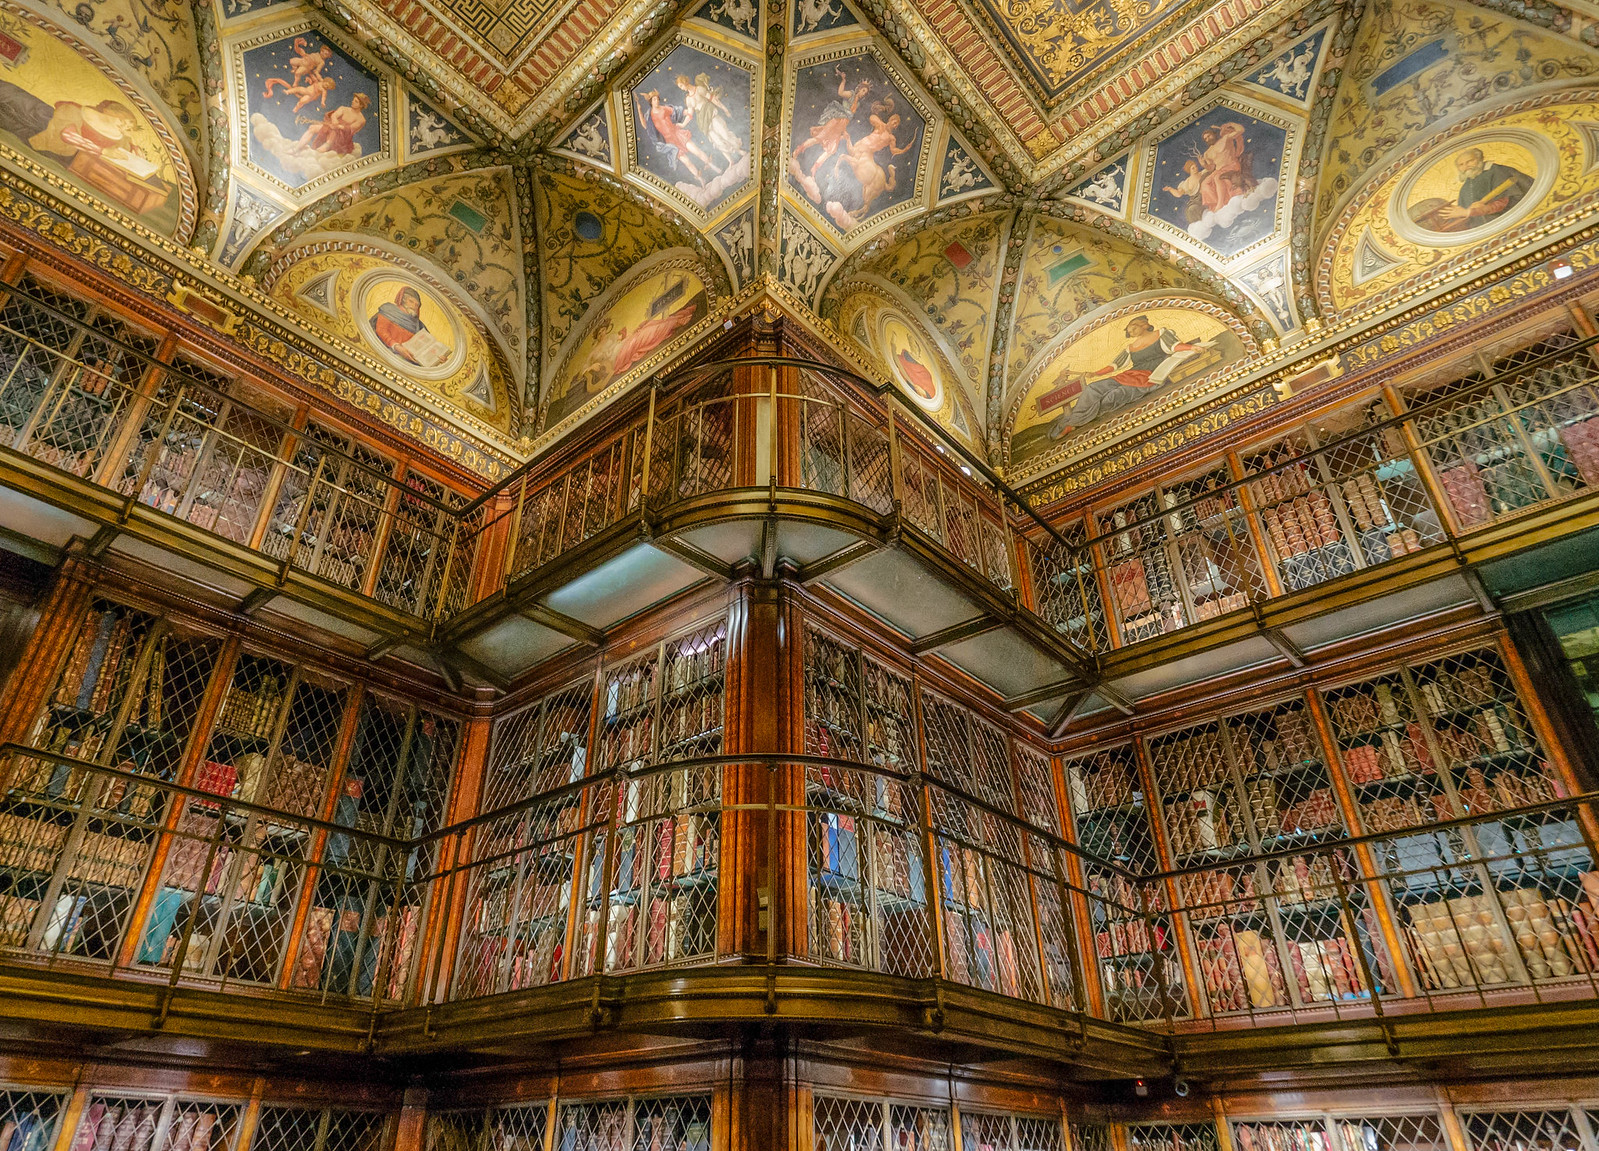 visit the morgan library in new york city